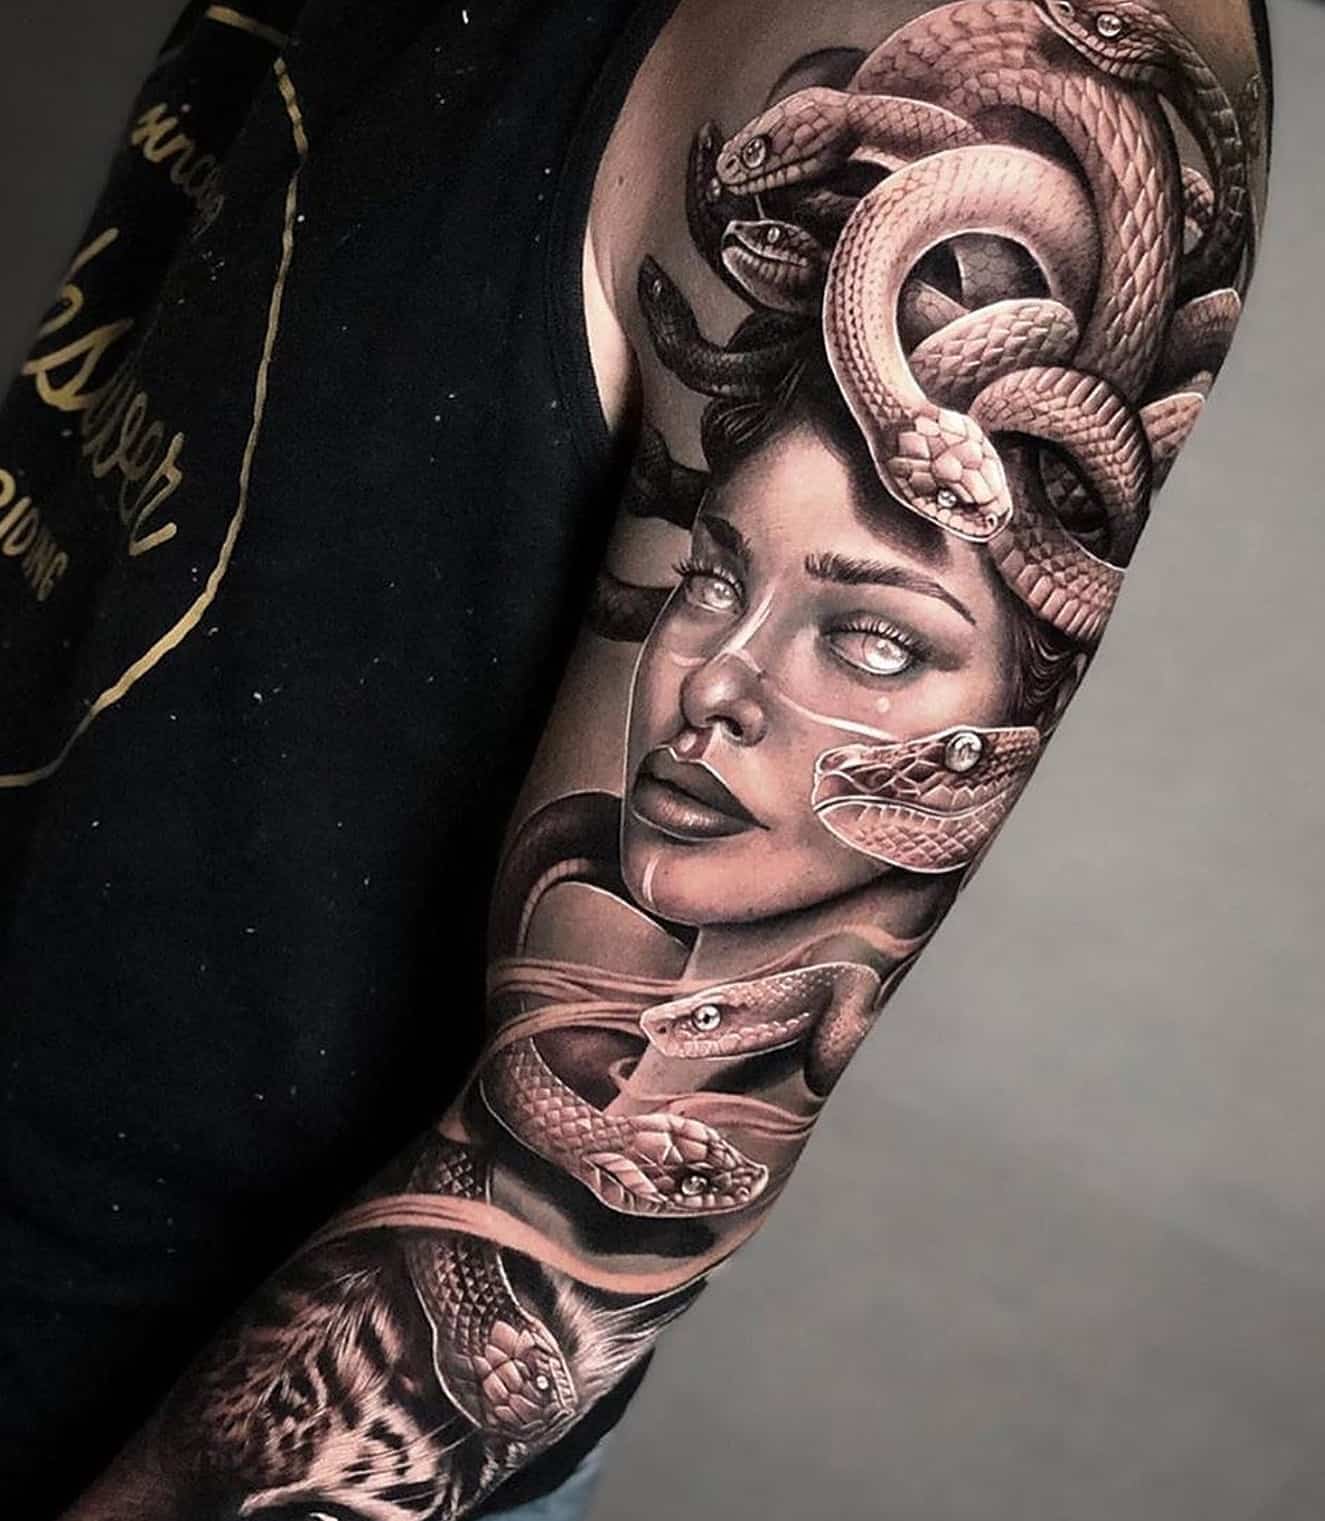 What Does a Medusa Tattoo Mean?